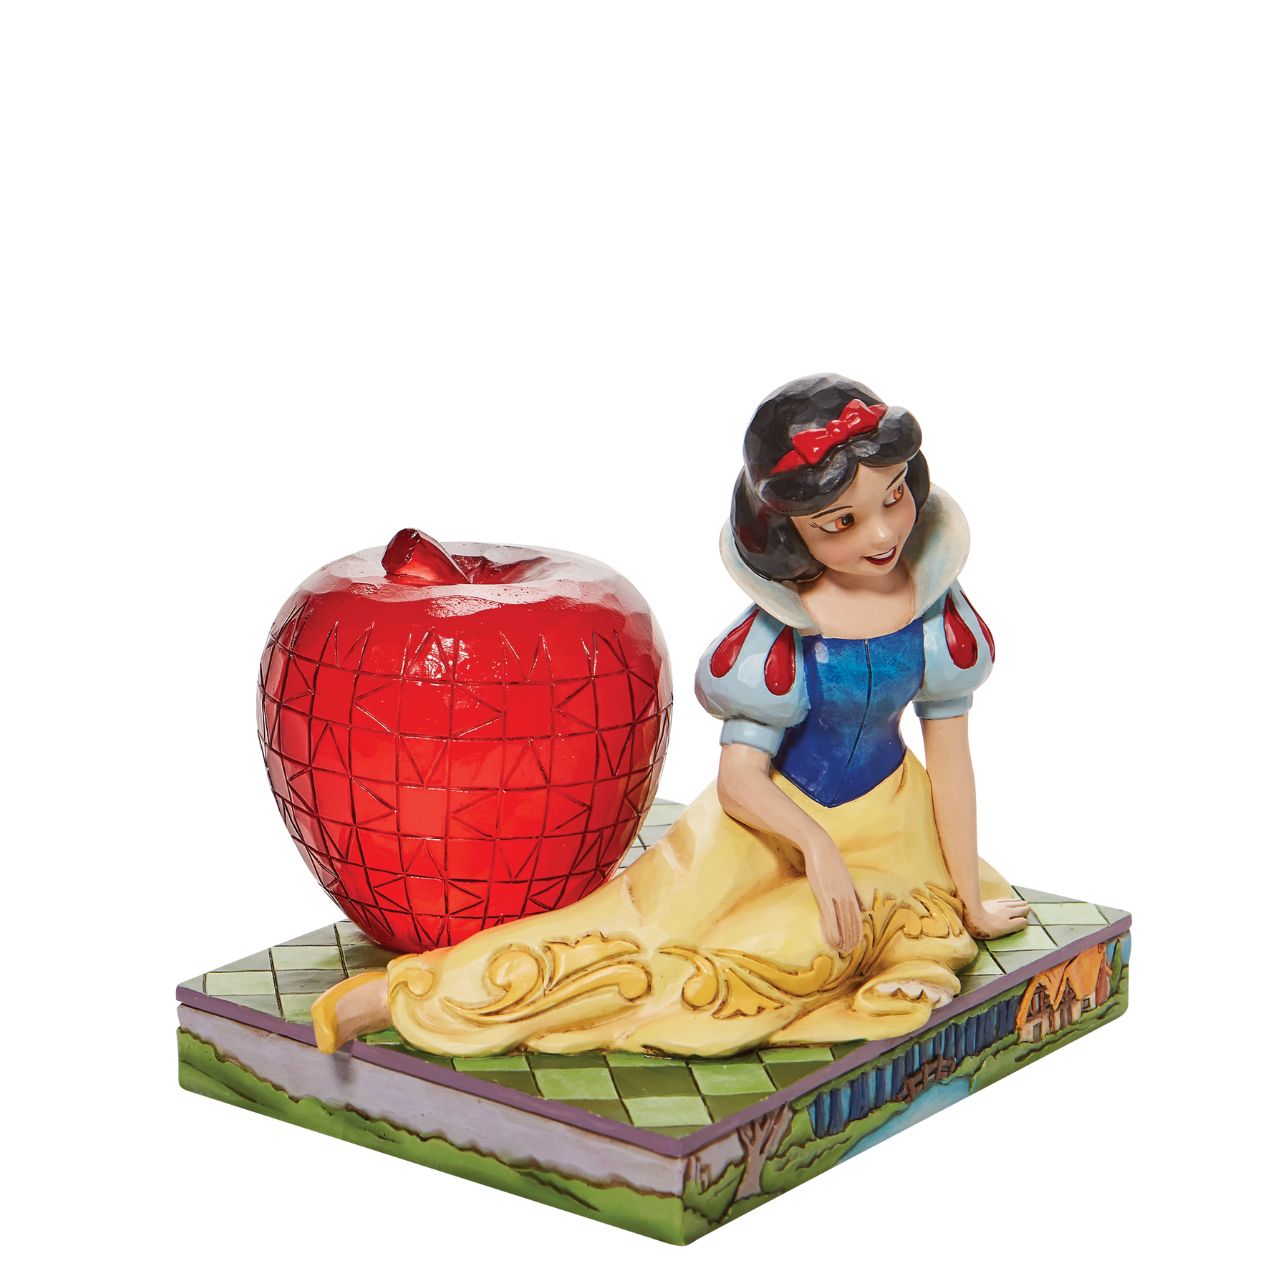 Jim Shore Disney Snow White with Apple Figurine  This Disney Traditions line by Jim Shore features iconic Walt Disney princesses with their famous props. With a base illustrating her story, this piece features Snow White in her famous gown next to a large apple.